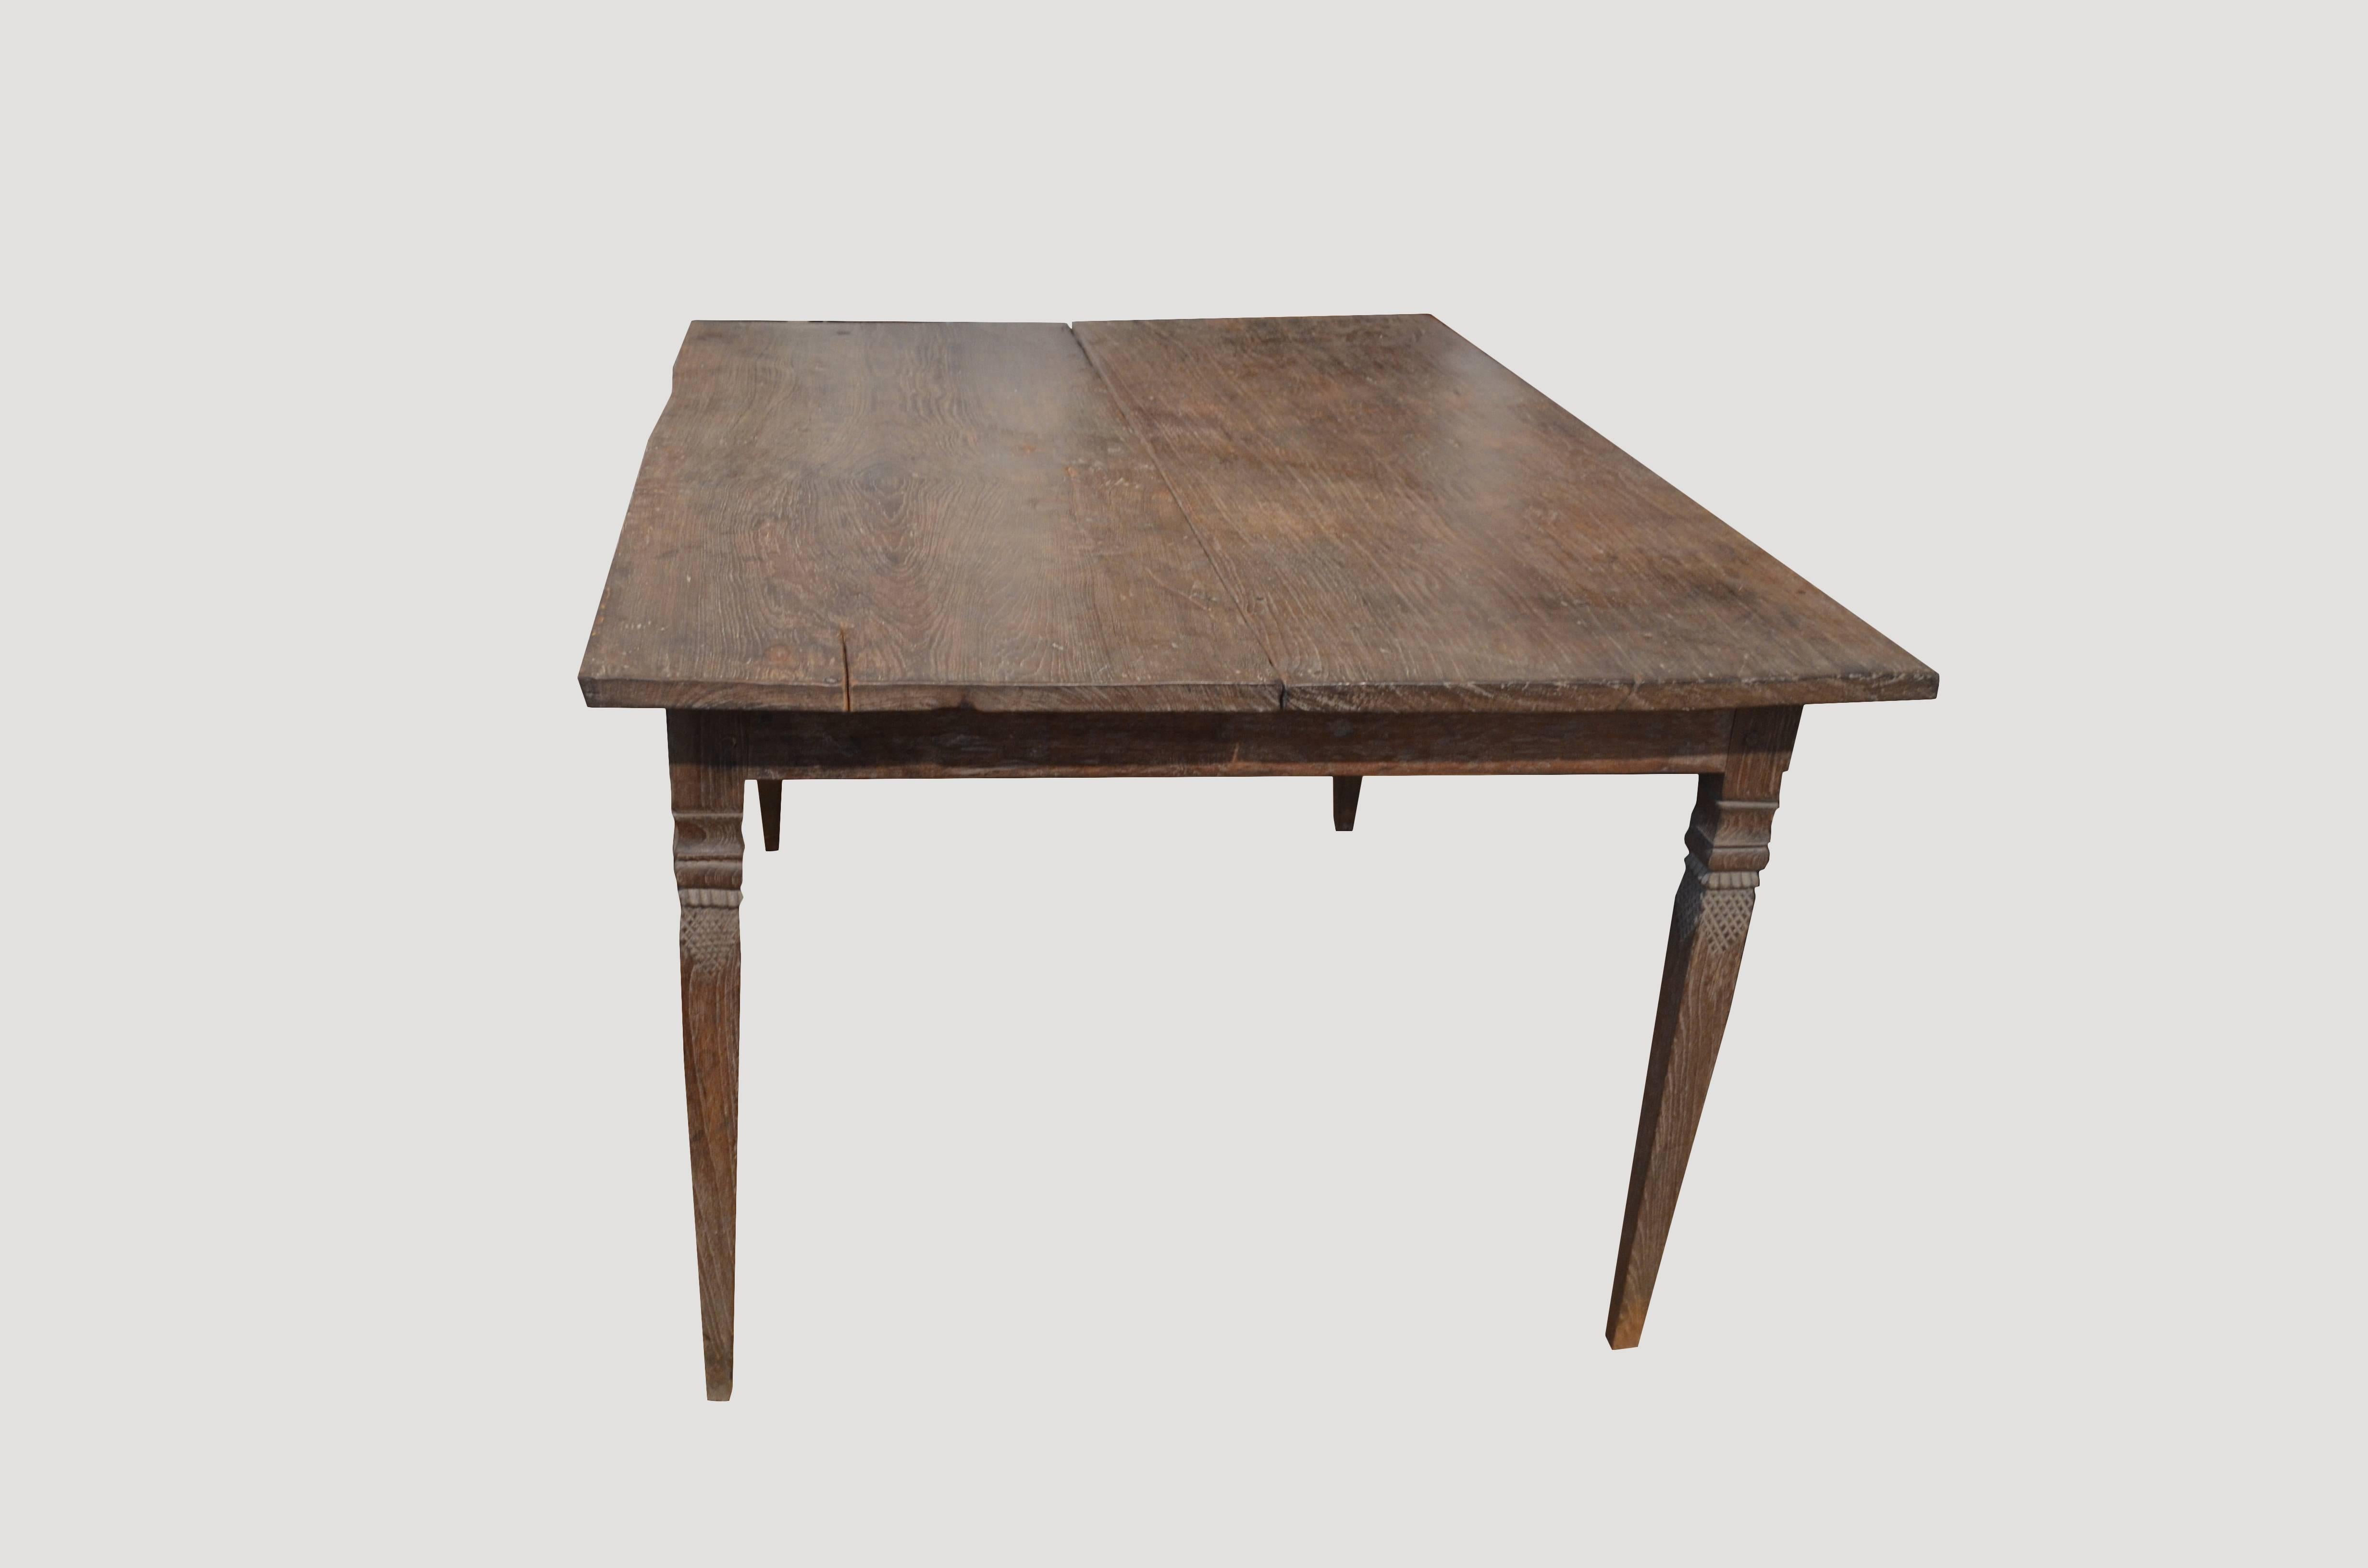 Beautiful carved legs on a two plank antique teak wood dining table.

This dining table was sourced in the spirit of wabi-sabi, a Japanese philosophy that beauty can be found in imperfection and impermanence. It’s a beauty of things modest and